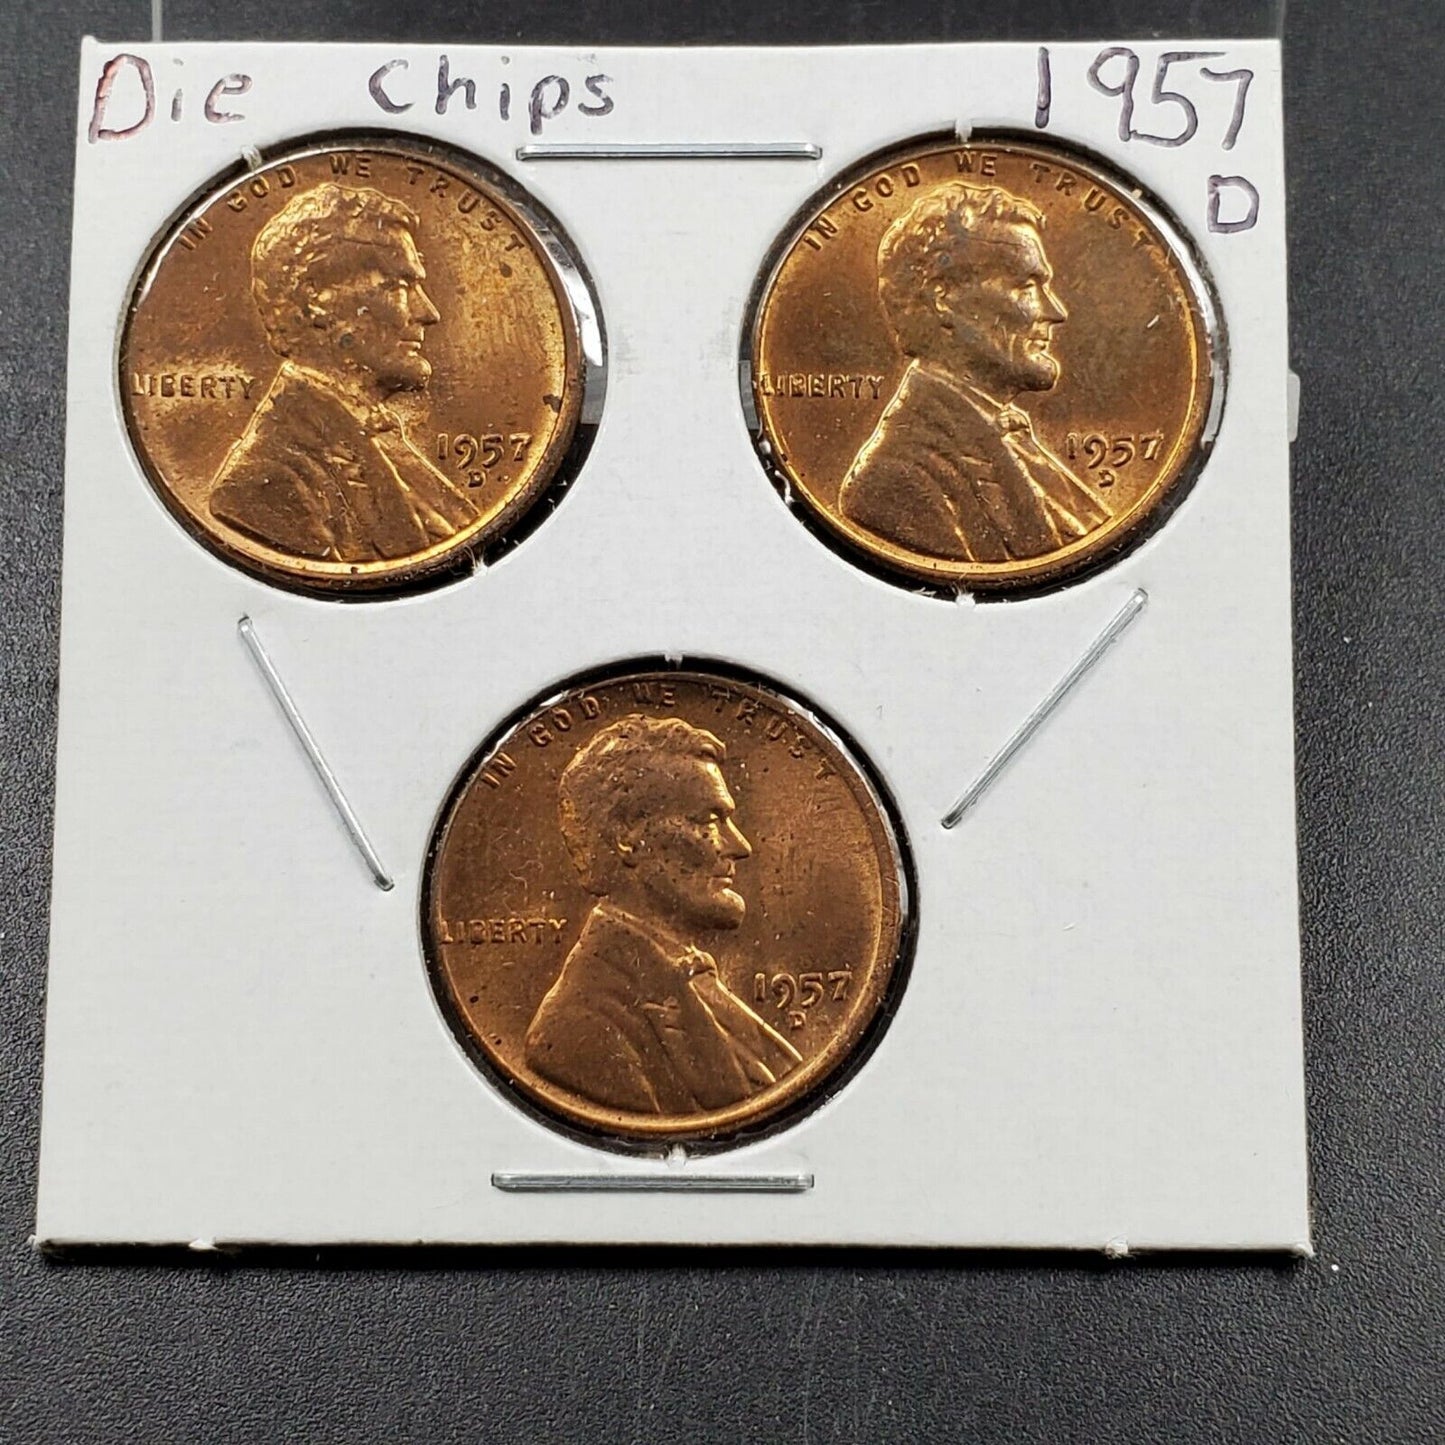 1957 D 1C Lincoln Cent Variety Trio Pack Die Chips AU / UNC 3 coins